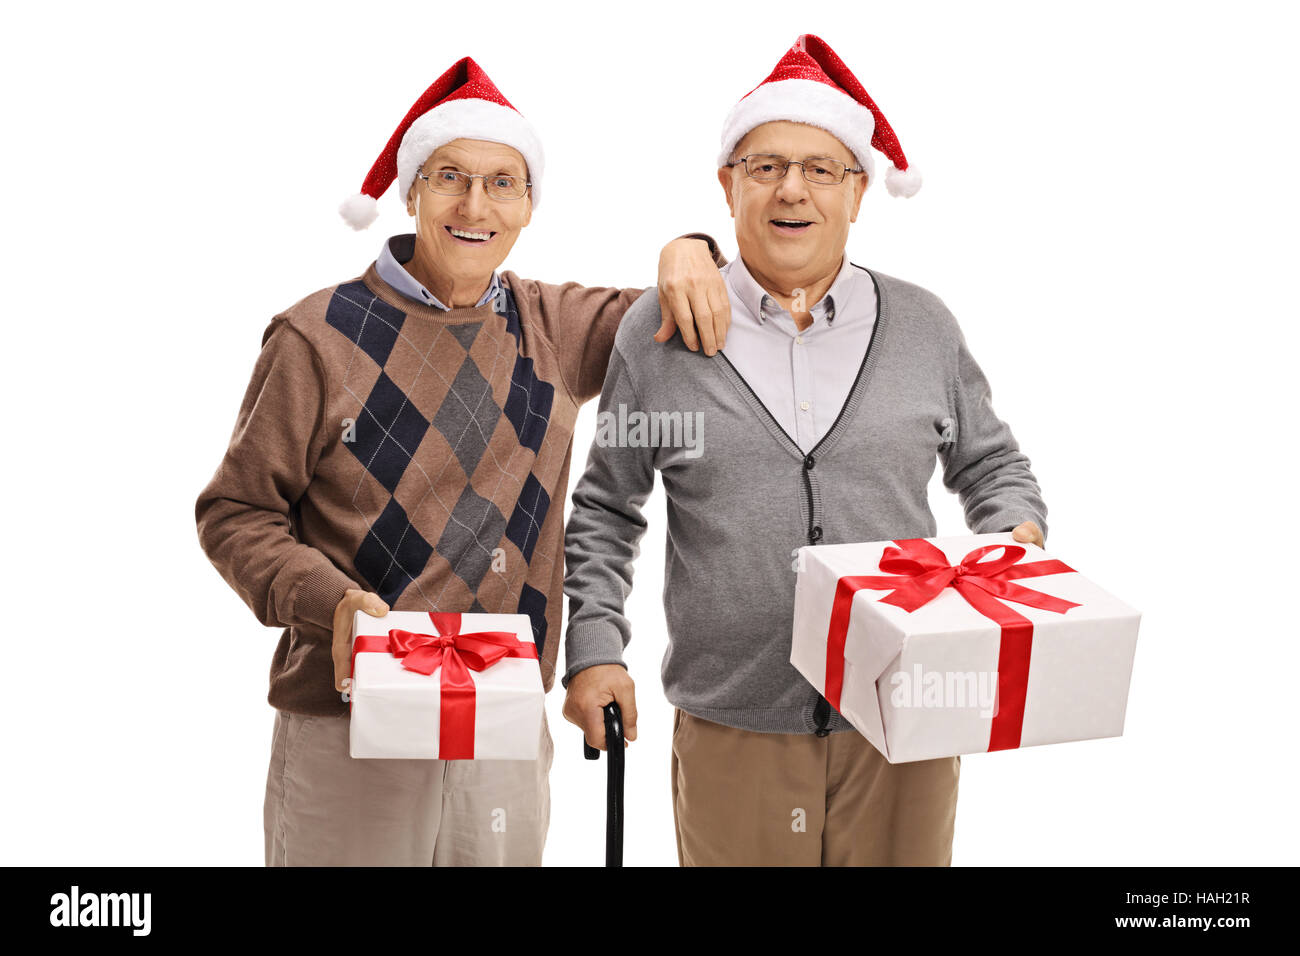 Two elderly men wearing santa hats and holding christmas presents isolated on white background Stock Photo